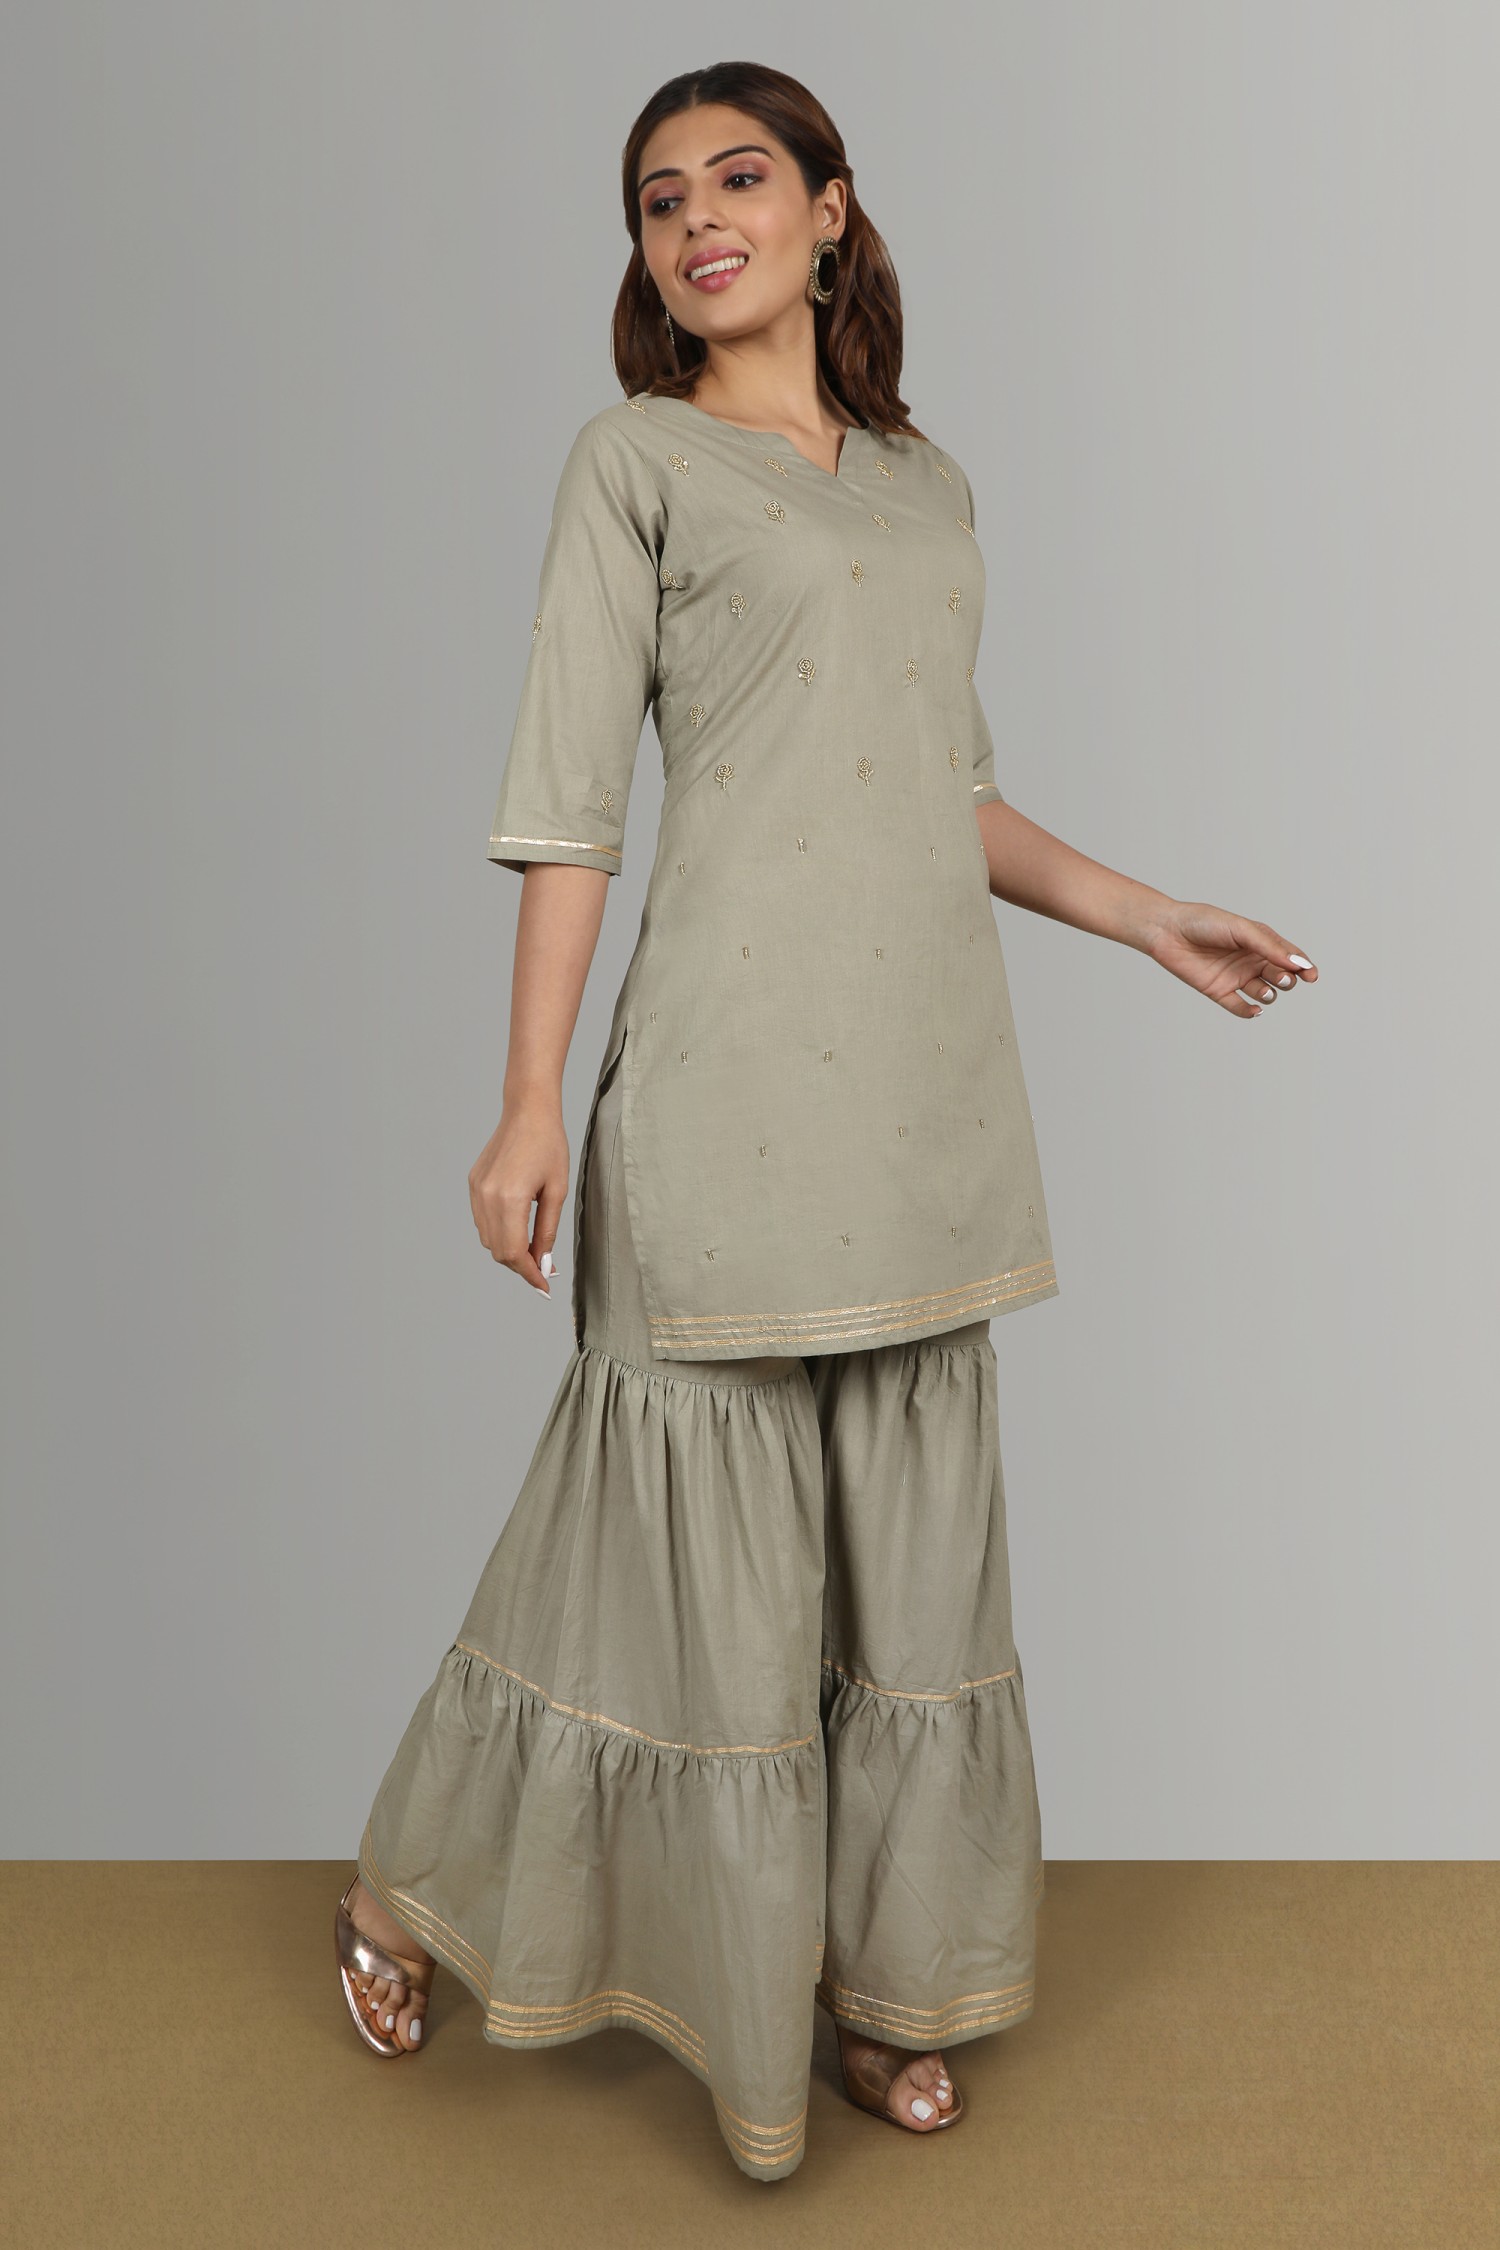 Khaadi - The perfect traditional Kurta with zari embroidery and gharara  pants is a must have for girls this season. Available in stores and online  now https://goo.gl/LaeS7z #KhaadiKids #Khaadi | Facebook